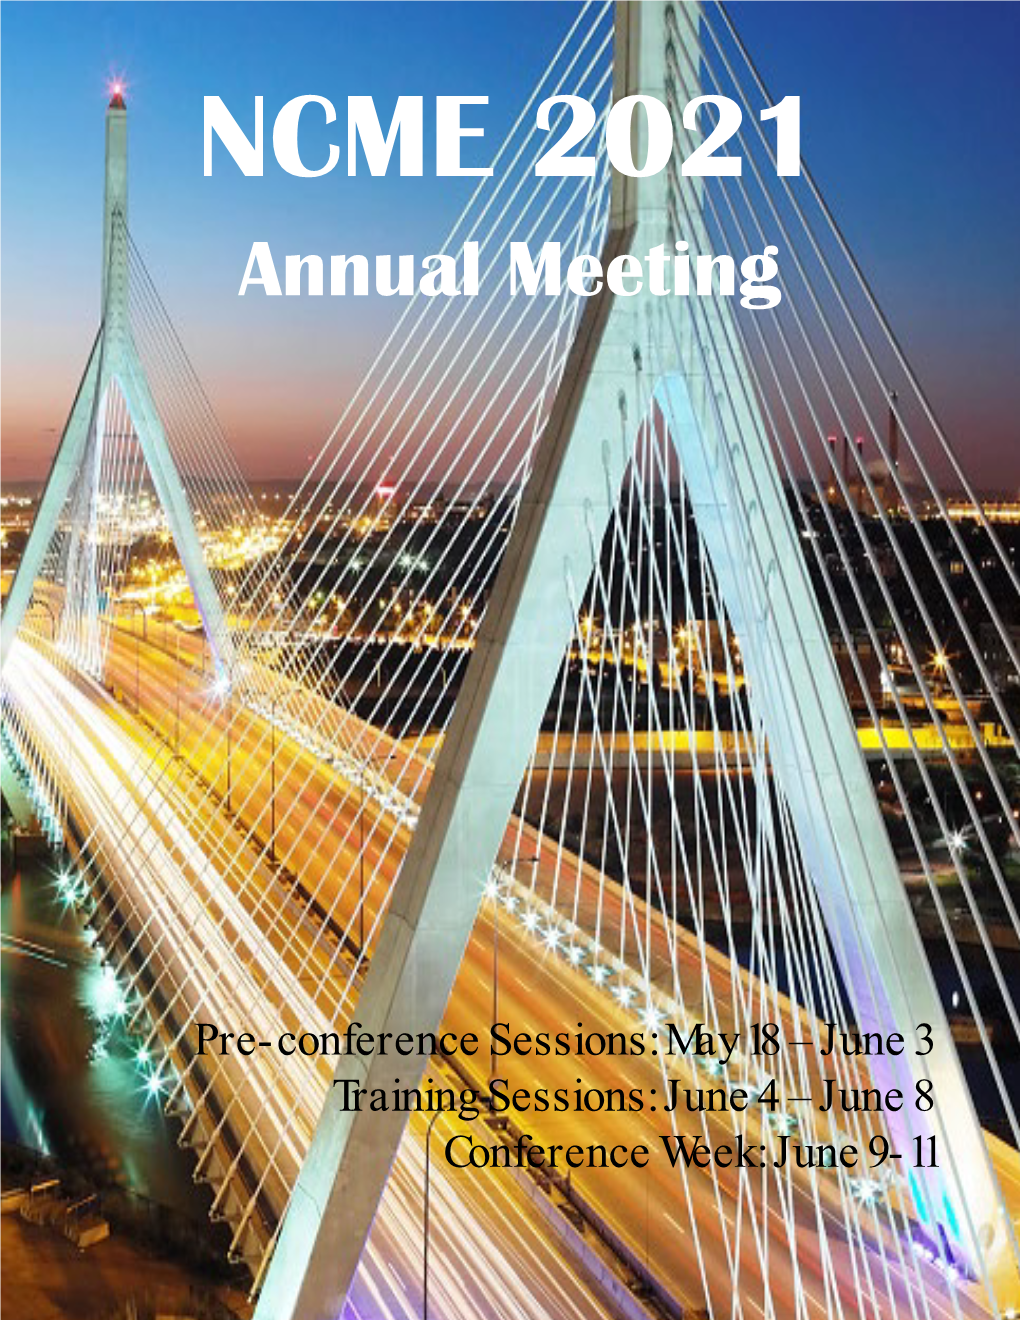 NCME 2021 Annual Meeting That Will Feature a Panel of SLE Experts Discussing Various Topics Raised by SLE SIGIMIE Members